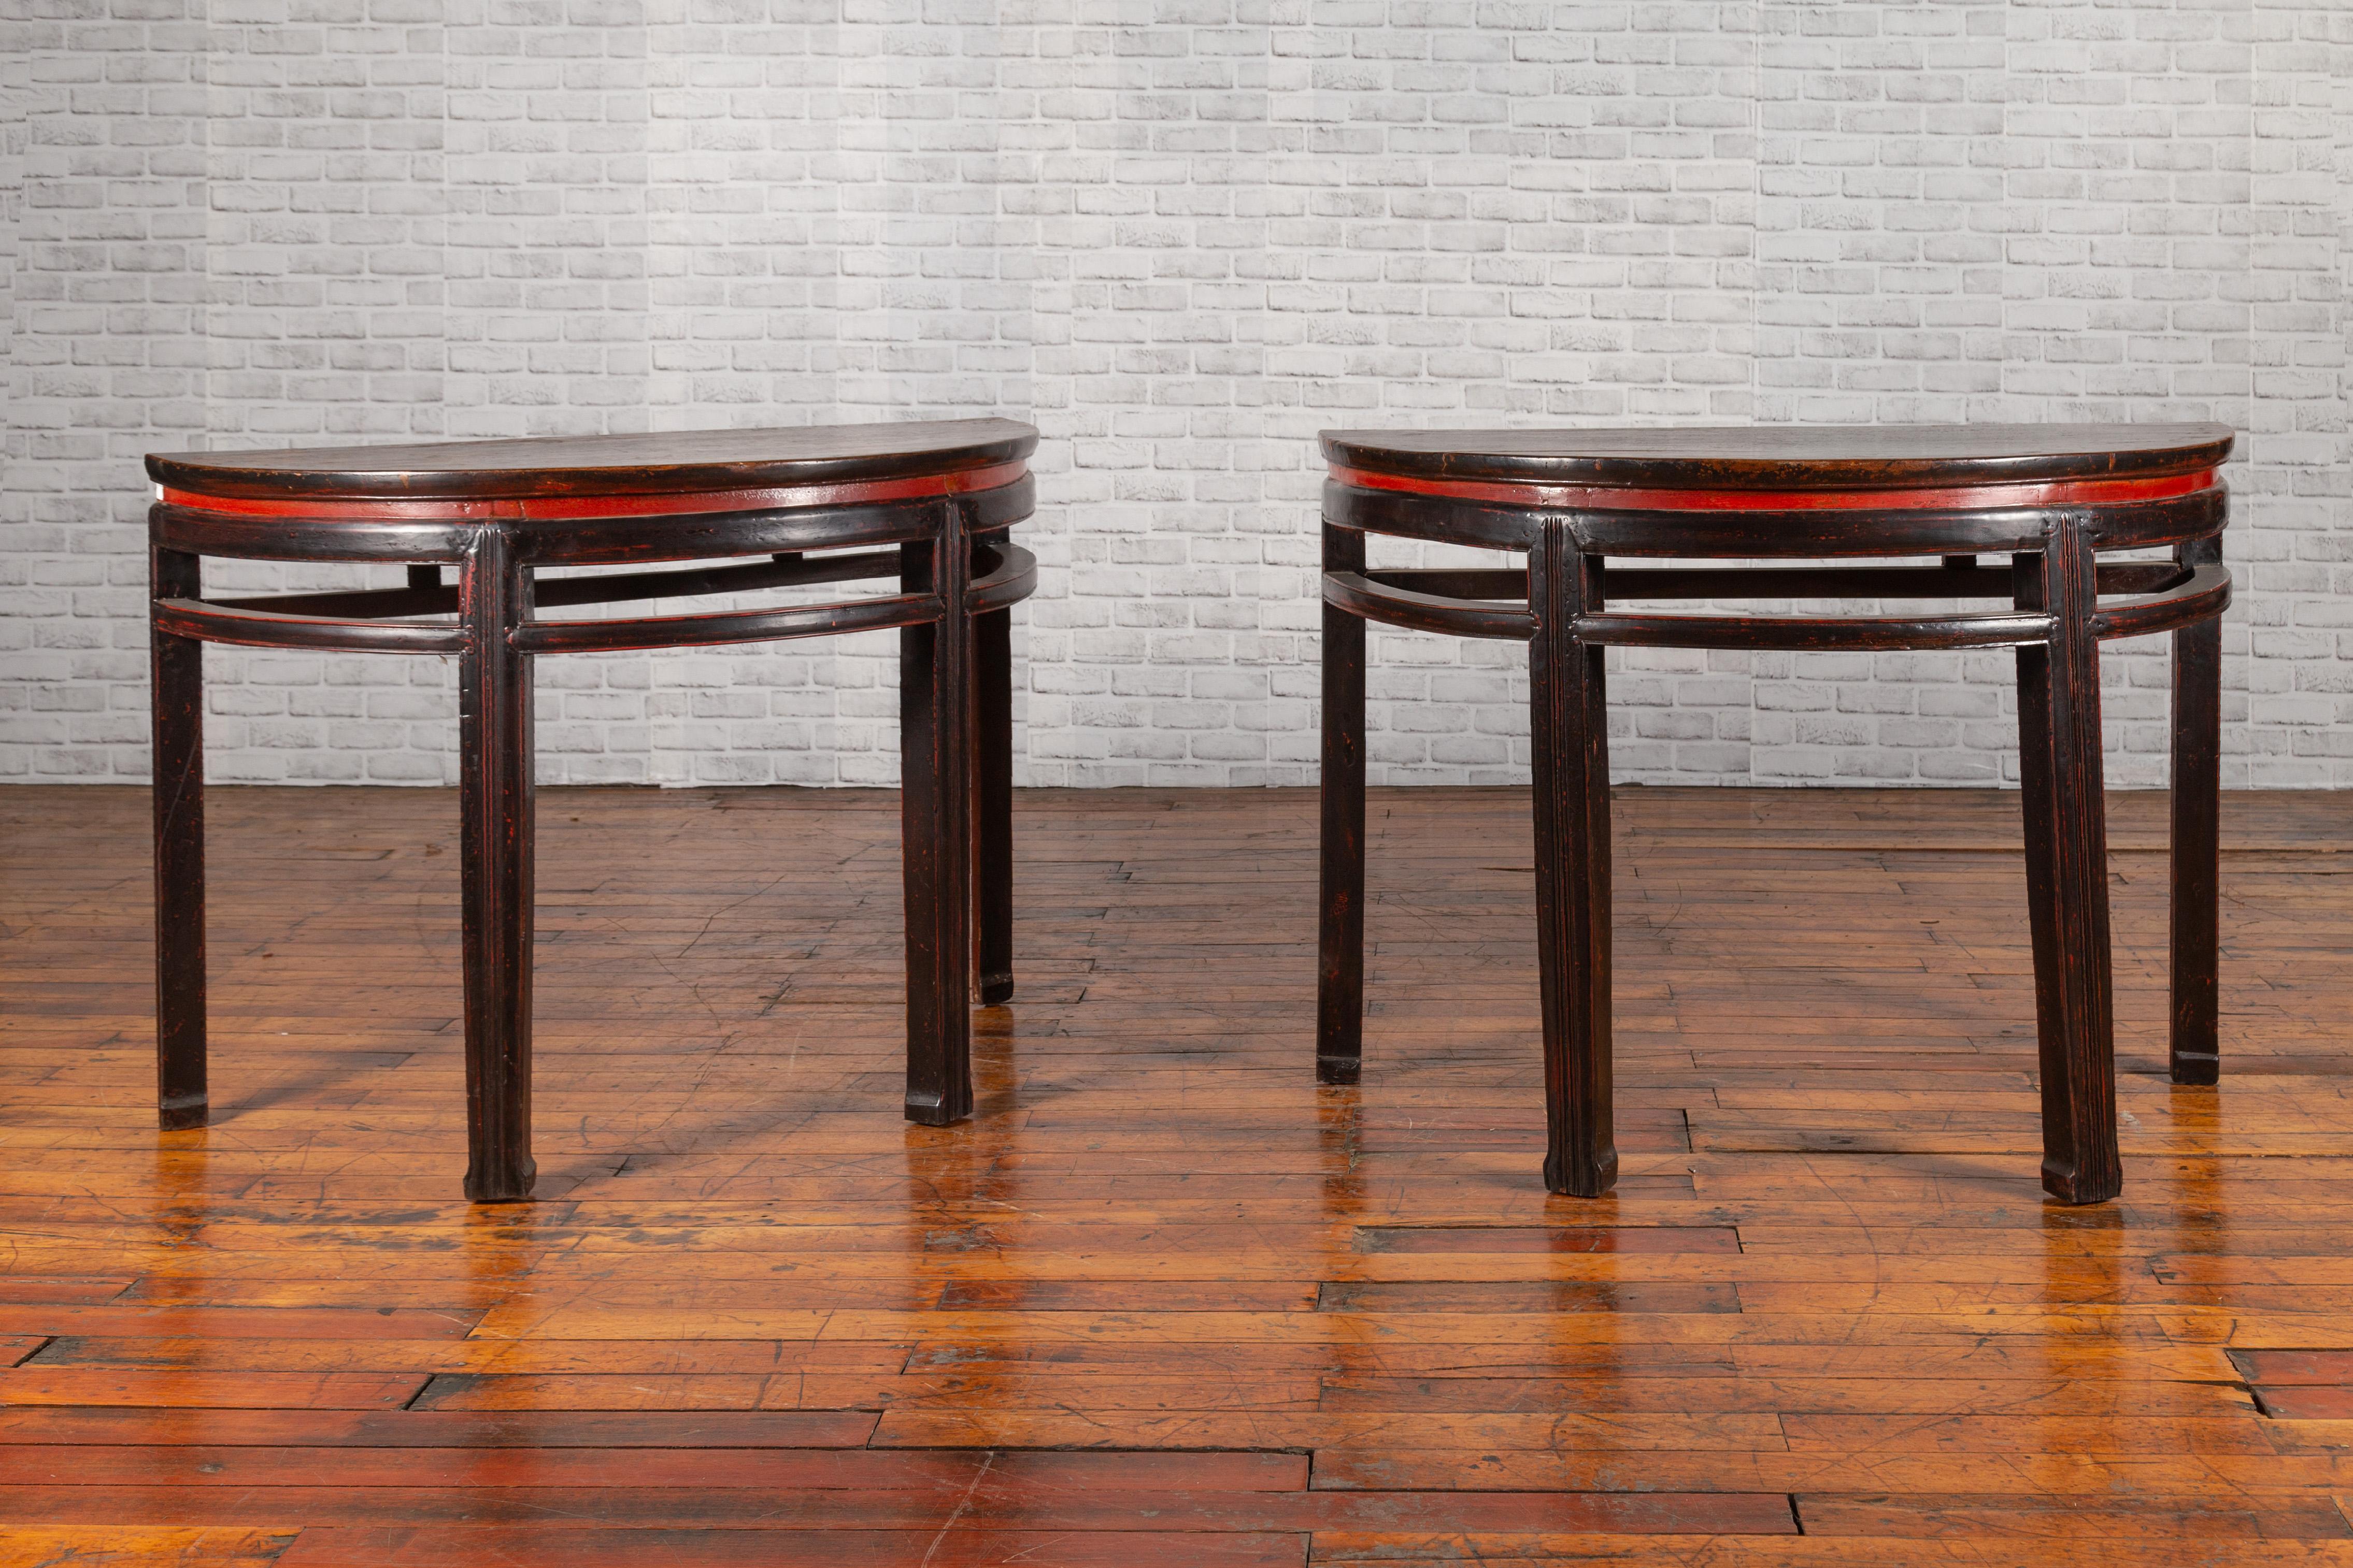 A pair of Chinese Qing Dynasty period demilune console tables from the 19th century, with original black and red lacquer. Created in China during the Qing Dynasty, each of this pair of demilunes features a semi-circular top showcasing a nicely